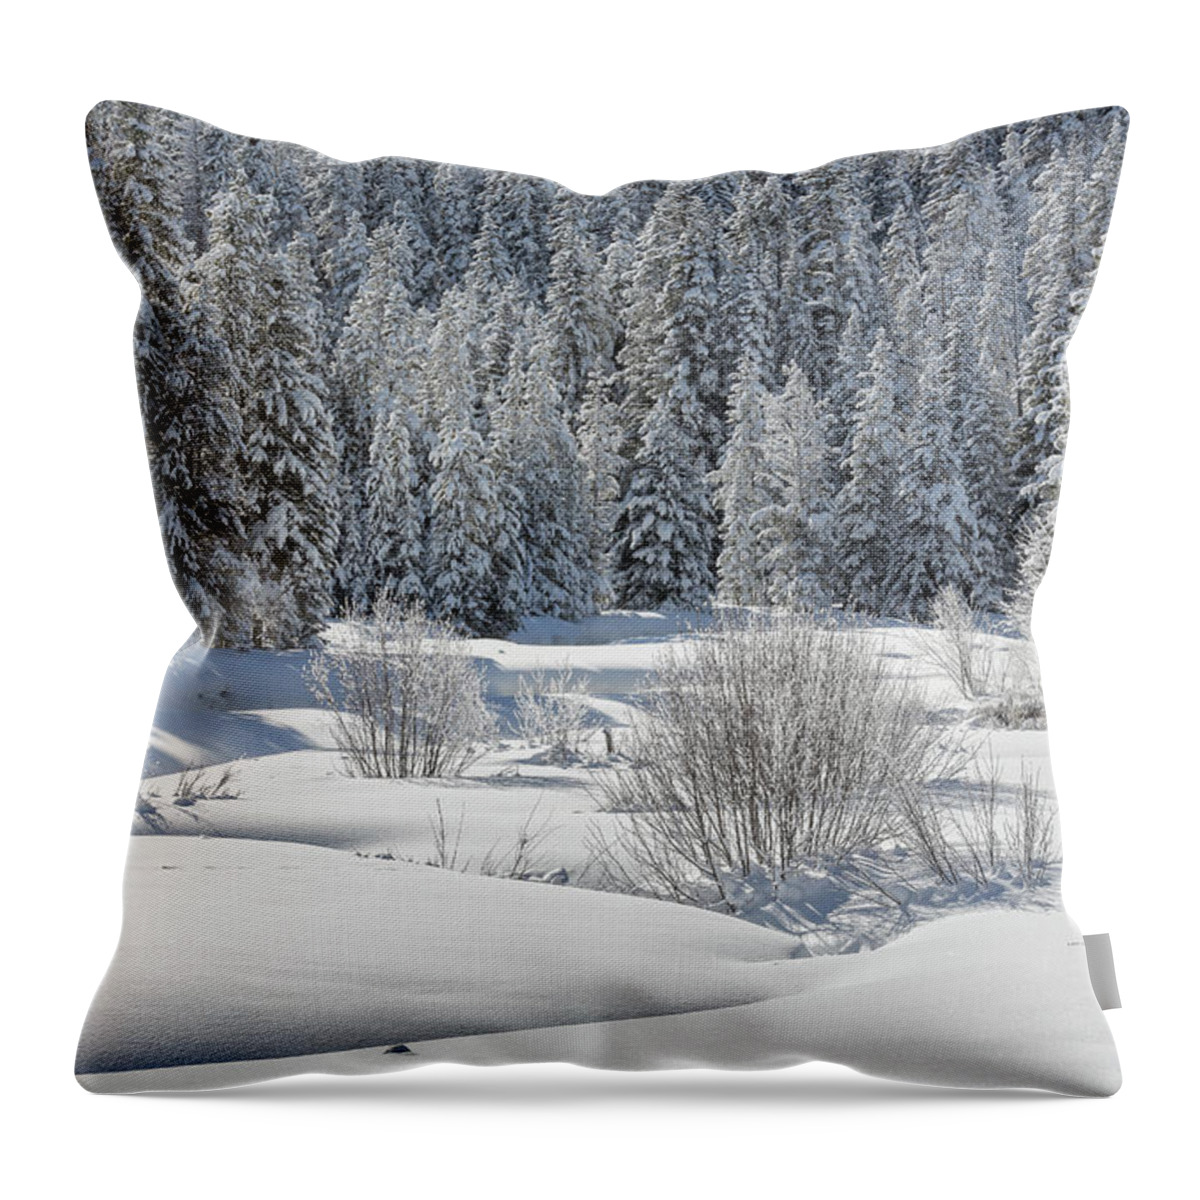 Yellowstone National Park Throw Pillow featuring the photograph Winter At Warm Creek by Ann Skelton